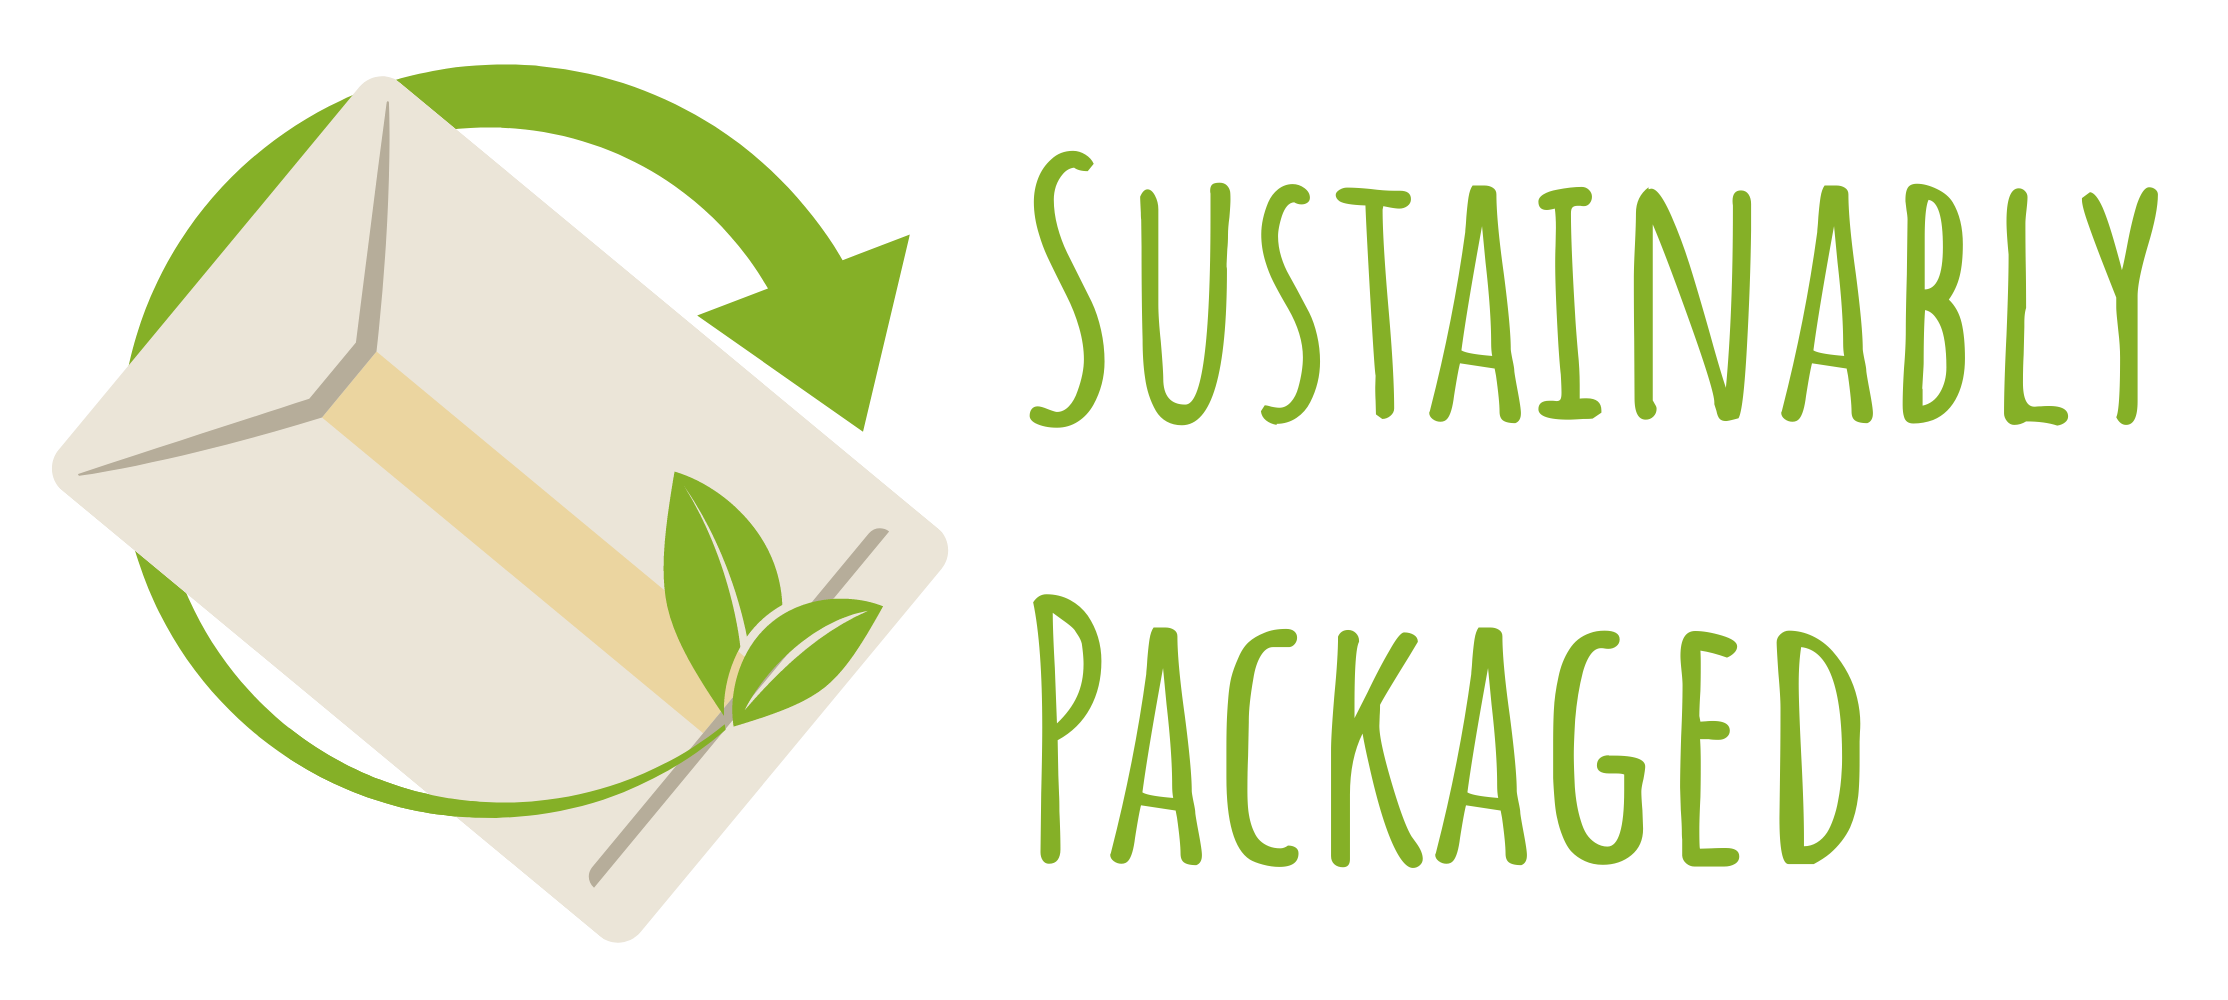 Sustainably Packaged